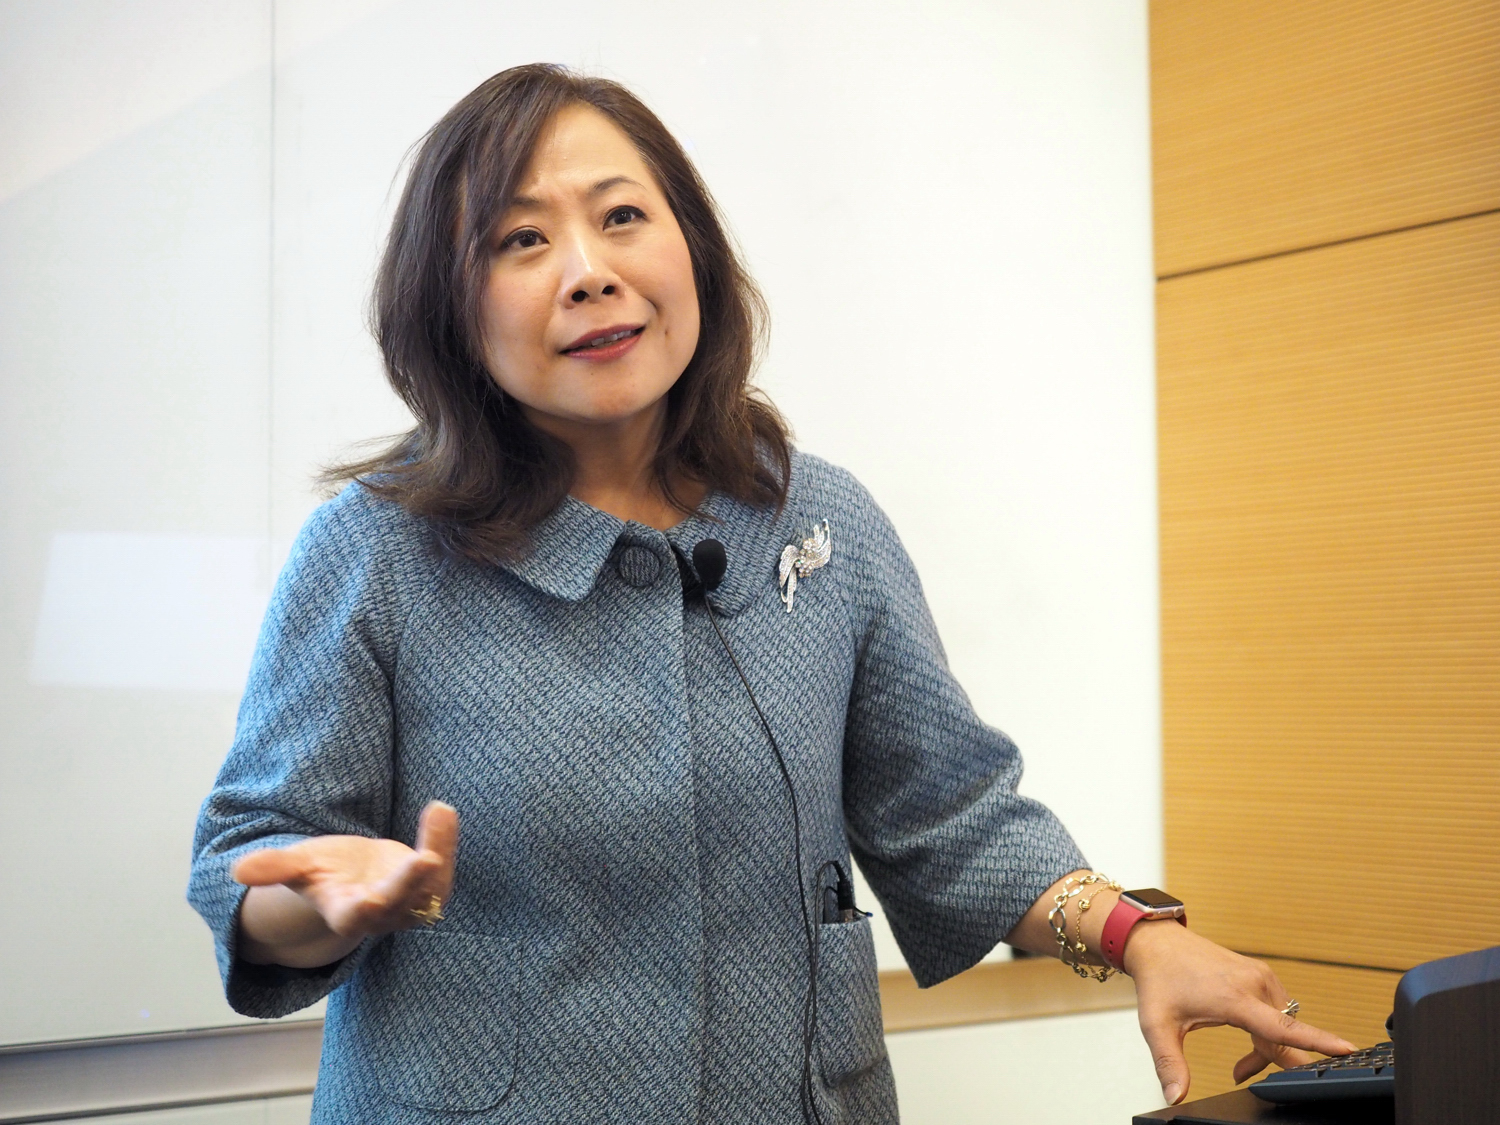 Dr. Judy Kim’s lecture 